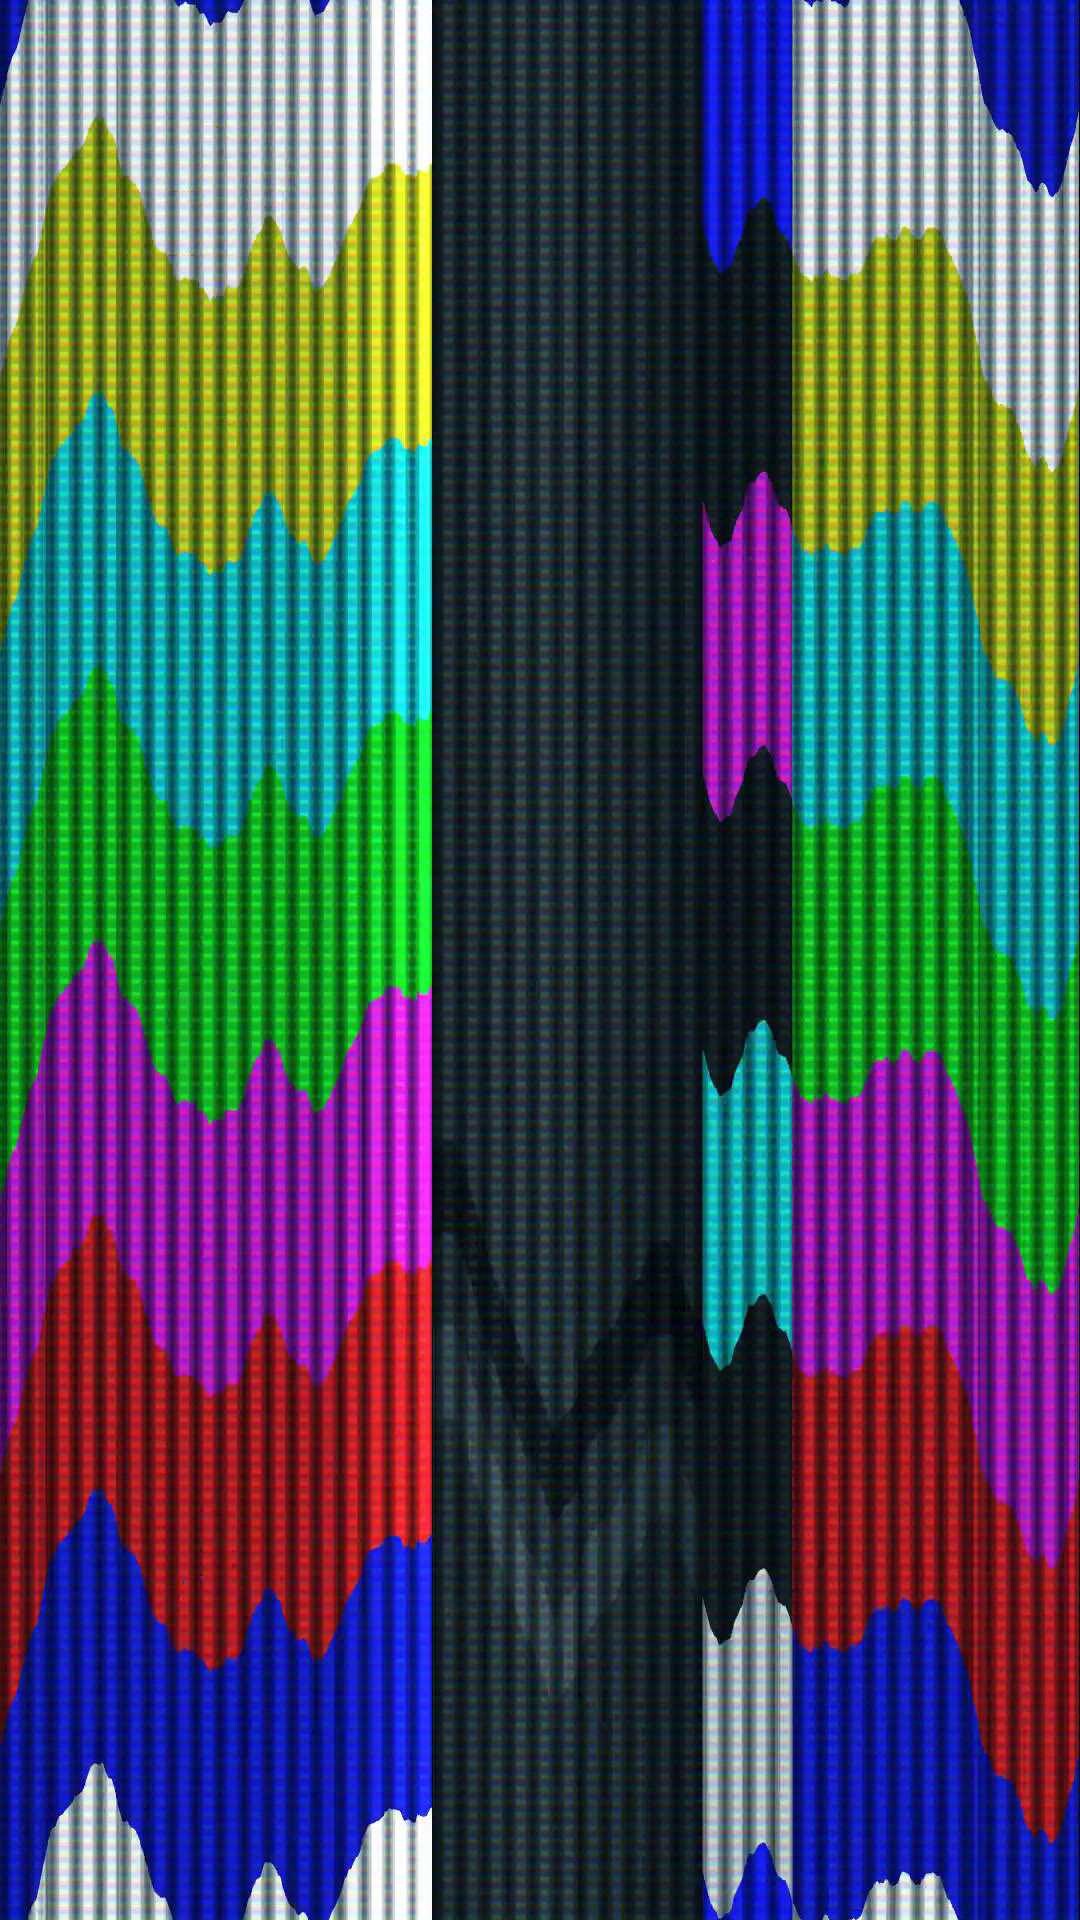 Glitch: A sudden instance of malfunctioning or irregularity in an electronic system. 1080x1920 Full HD Background.